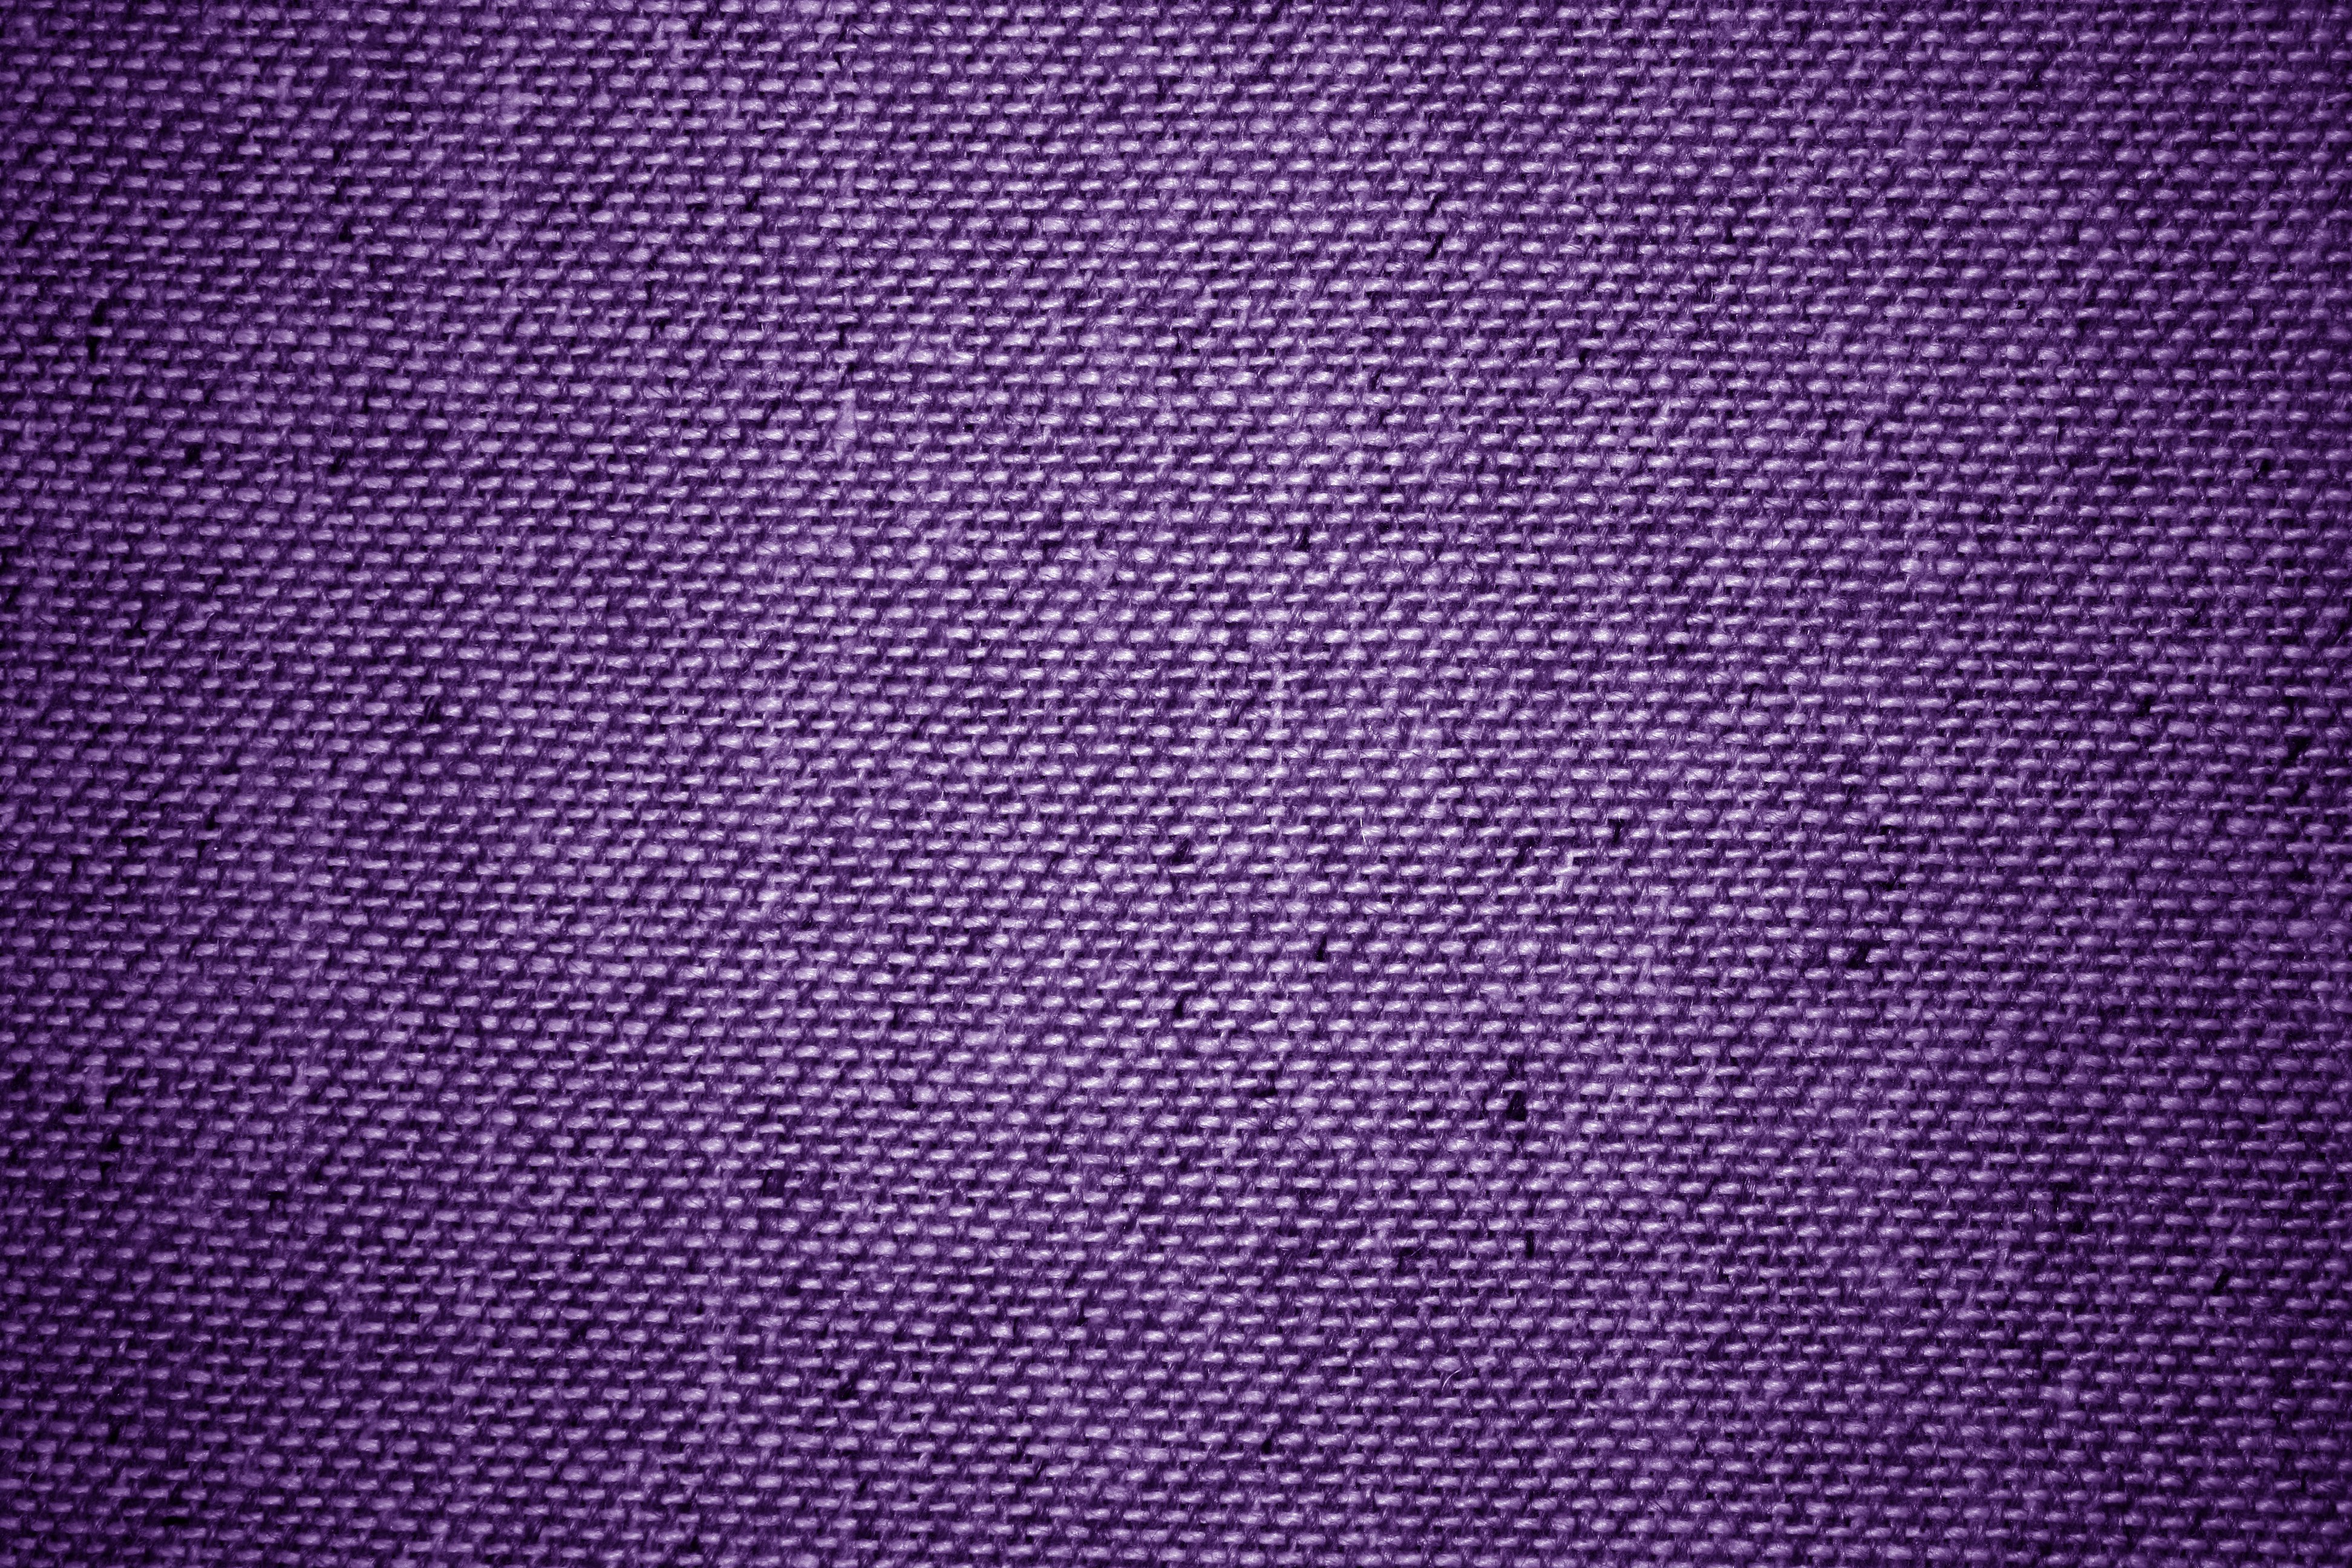 Purple Upholstery Fabric Close Up Texture Picture | Free Photograph ...